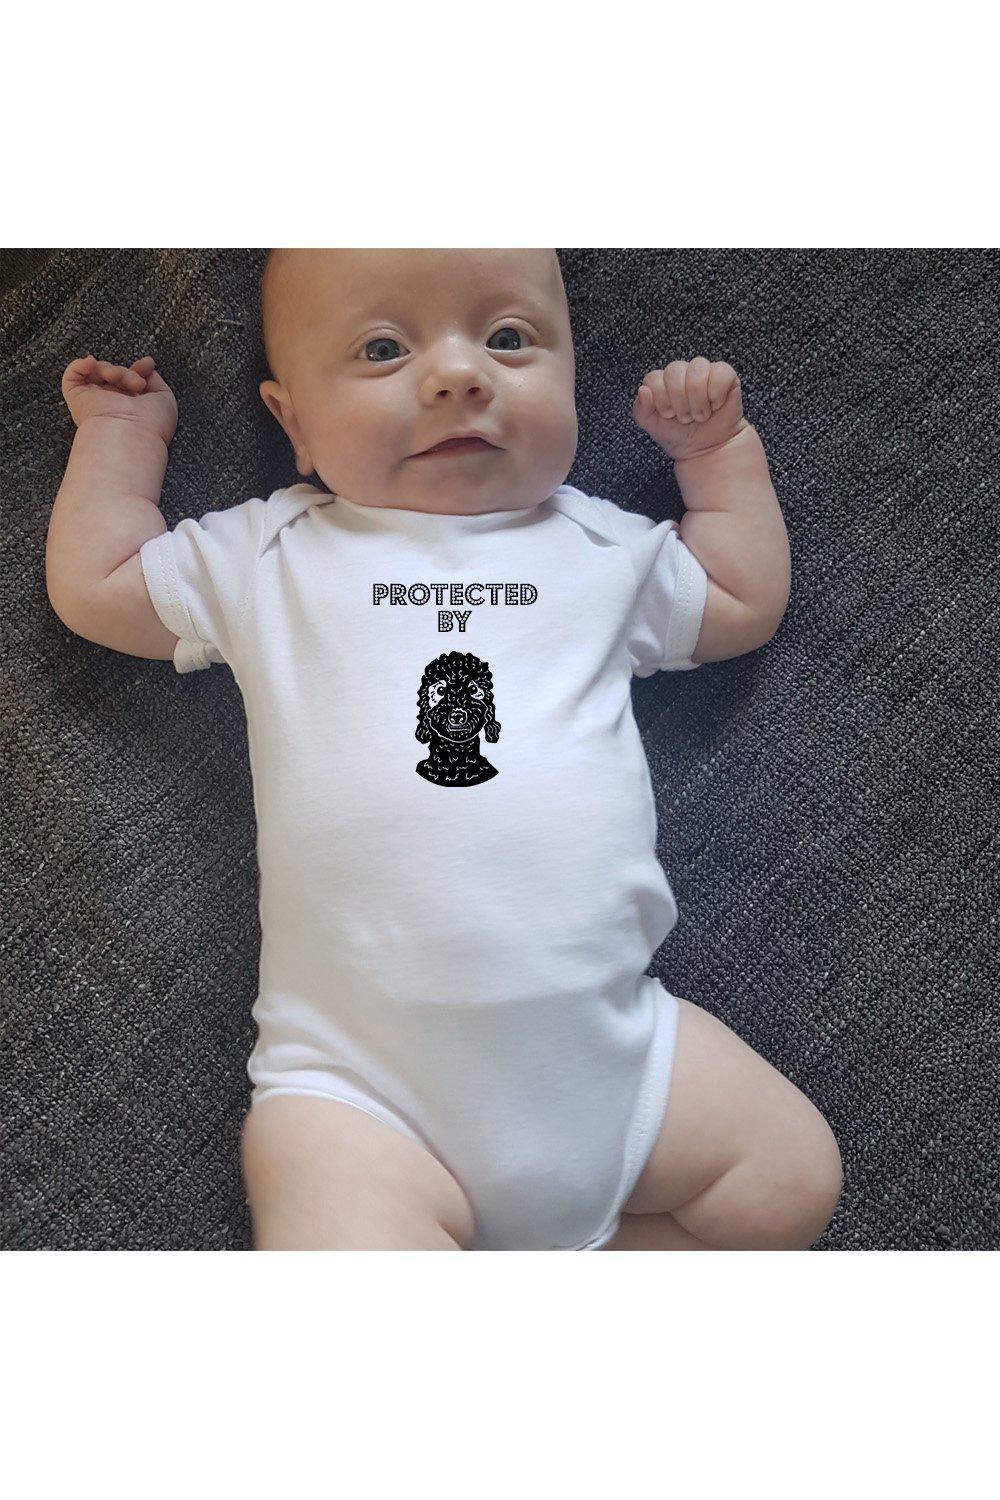 Protected by Bedlington Terrier Dog Baby bodysuit and Baby Grow